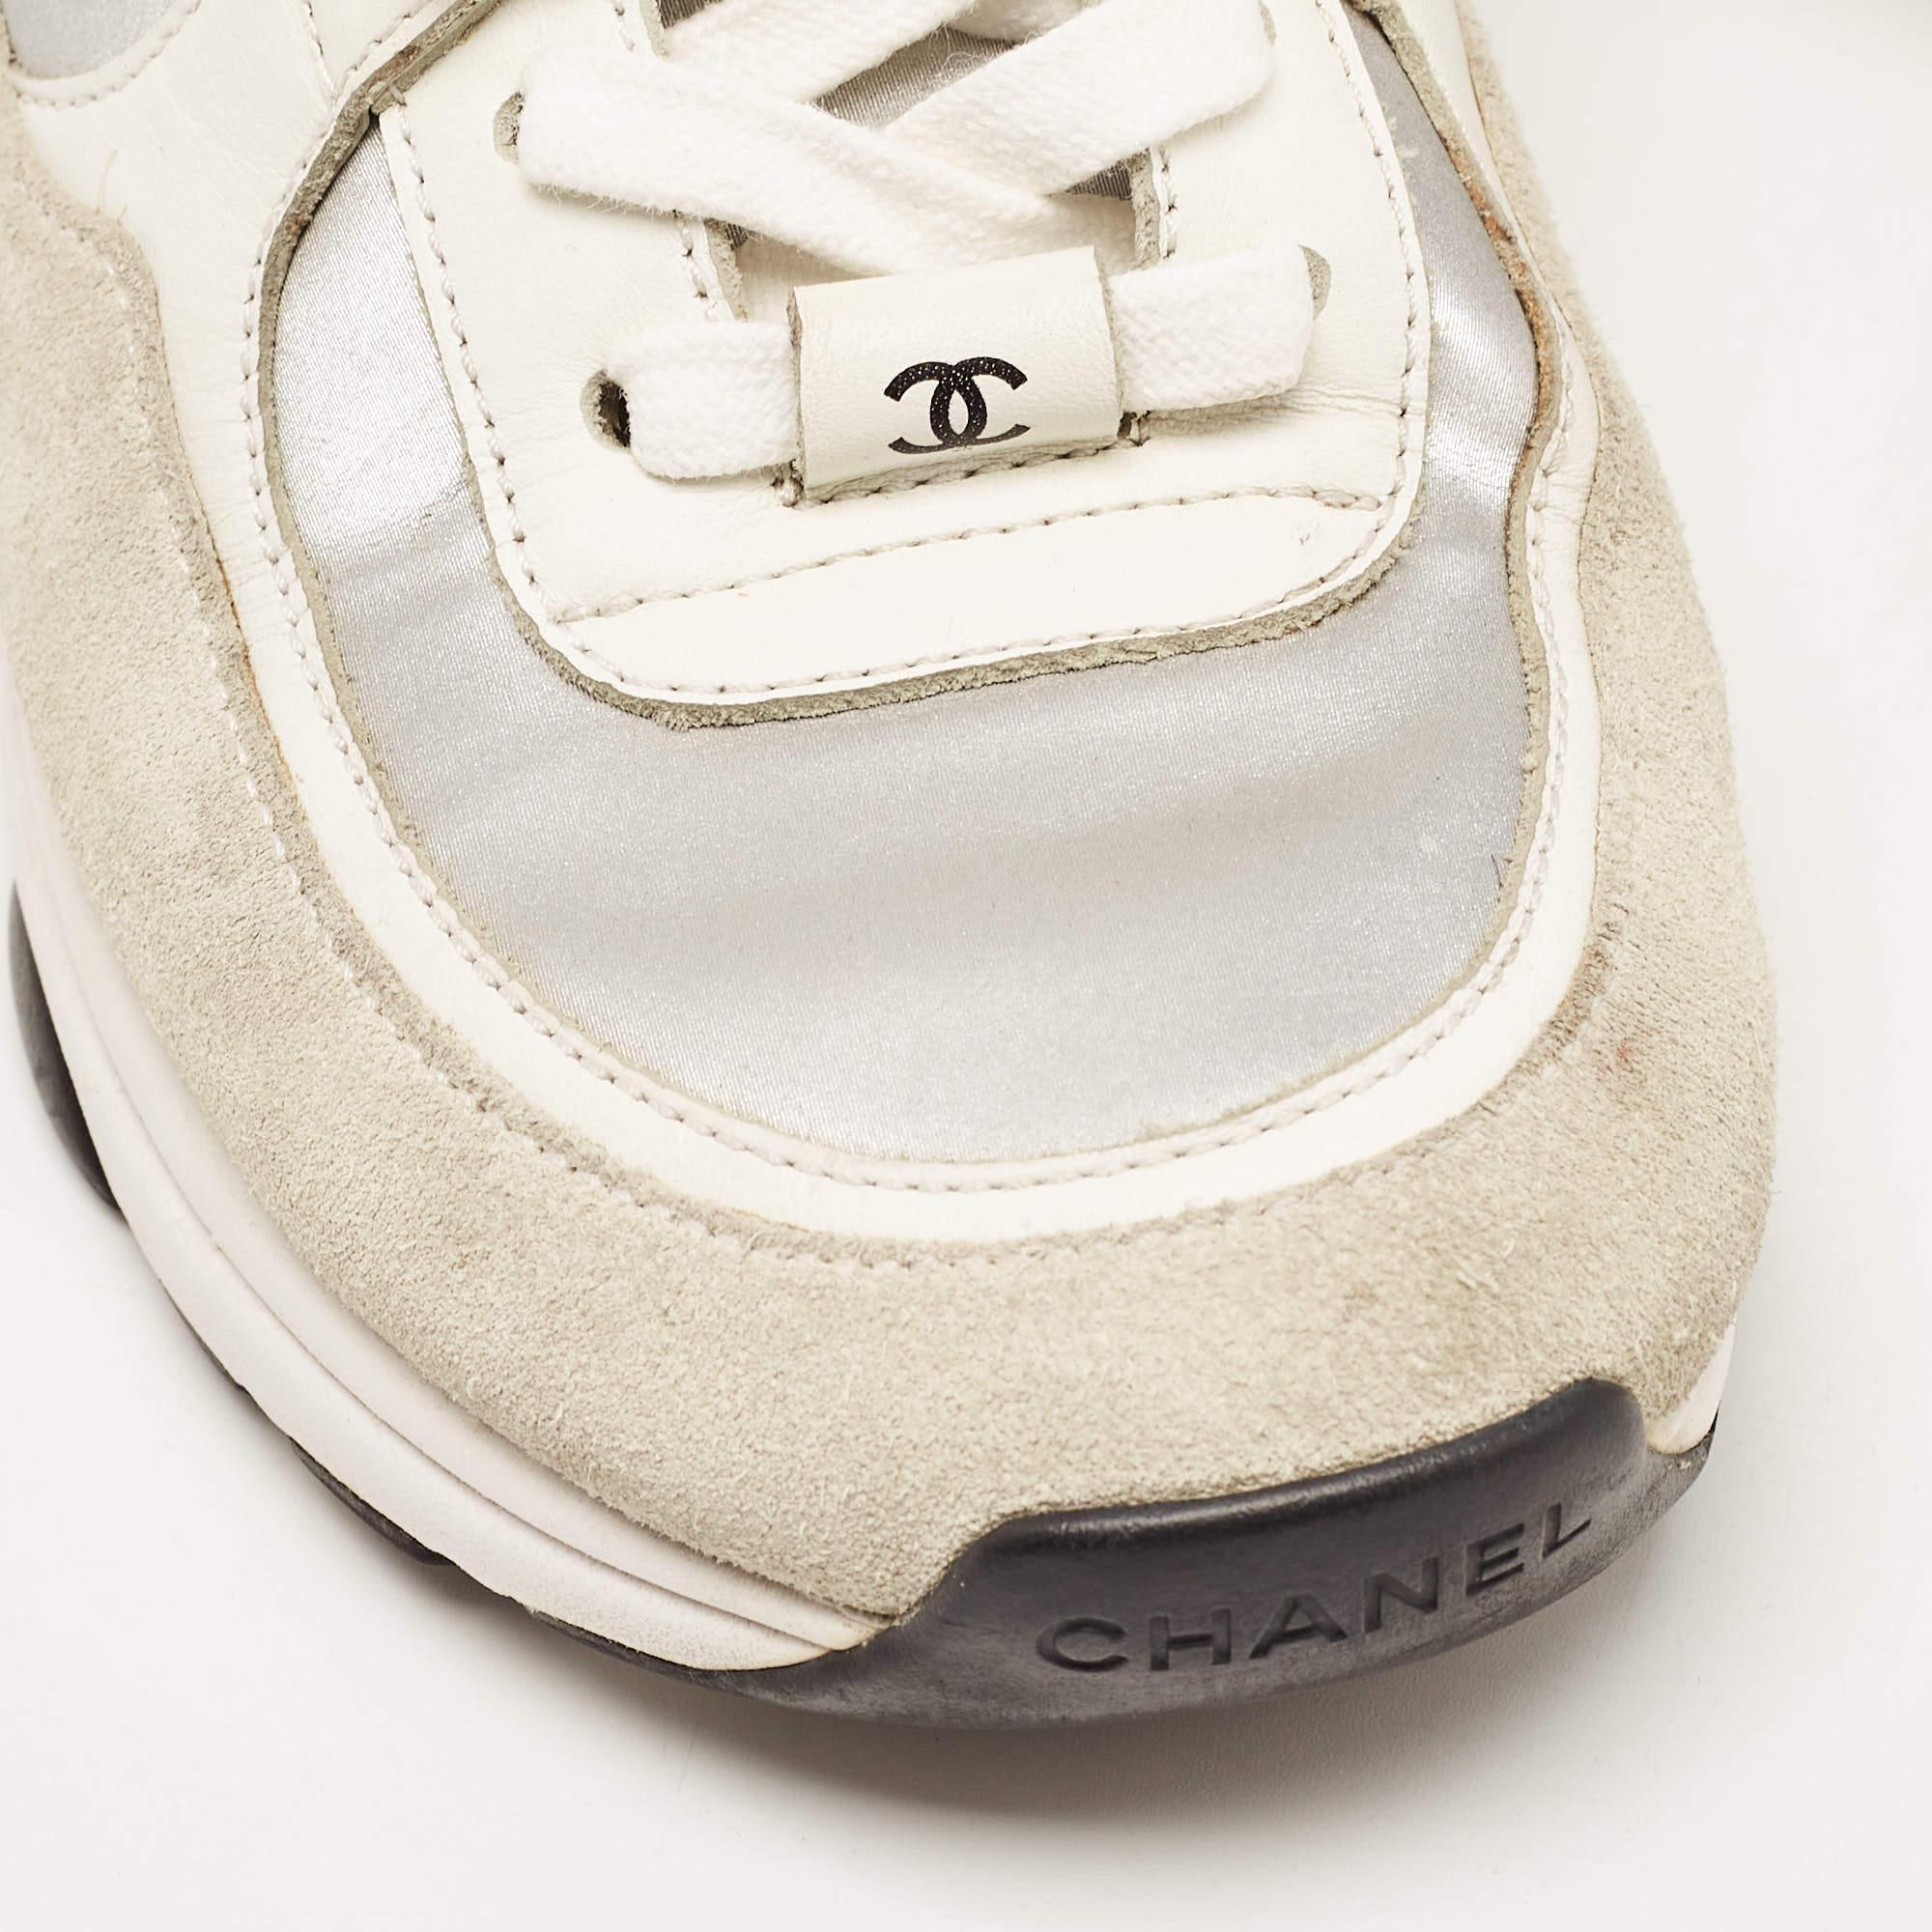 Chanel White/Black Suede and Leather CC Low Top Sneakers Size 36 1